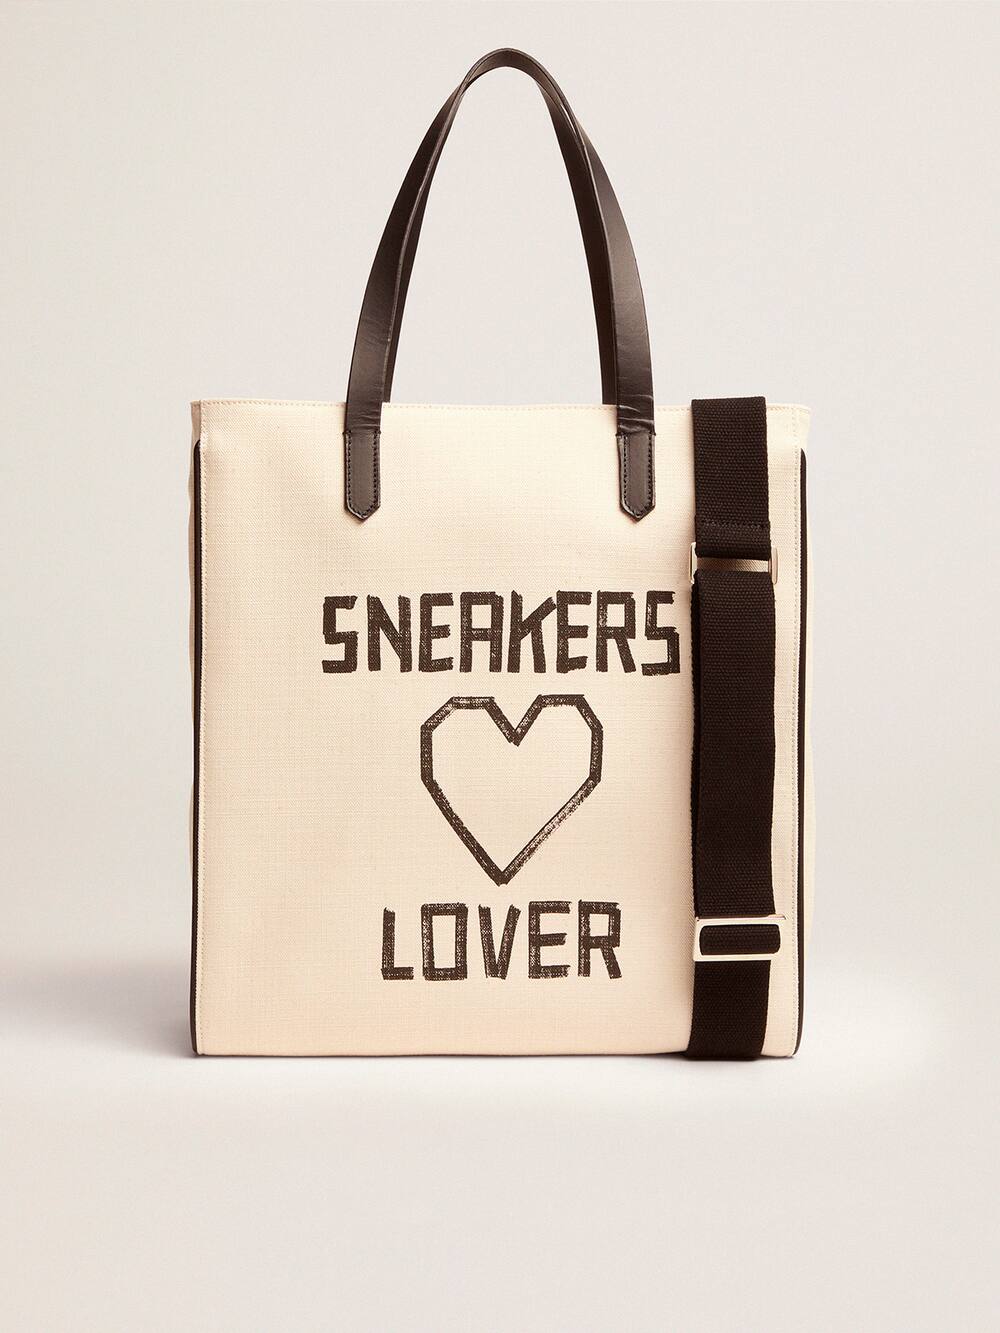 Golden Goose - Sac California North-South « Sneakers Lovers » in 